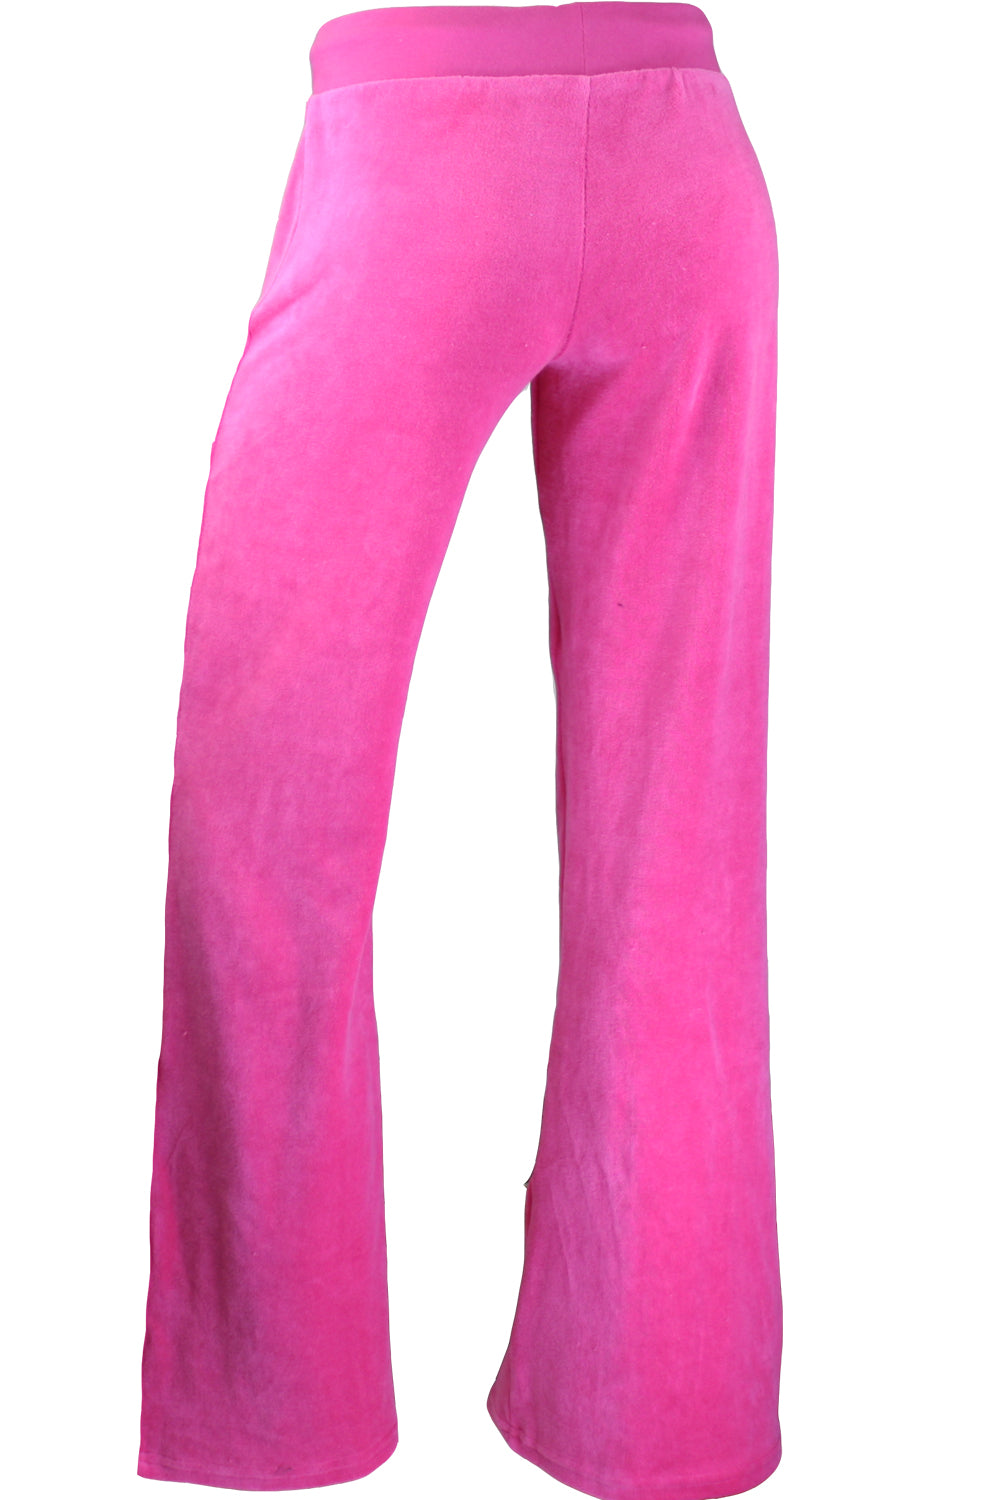 Hot Pink Velour Joggers Sweatpants Size Medium with Pockets